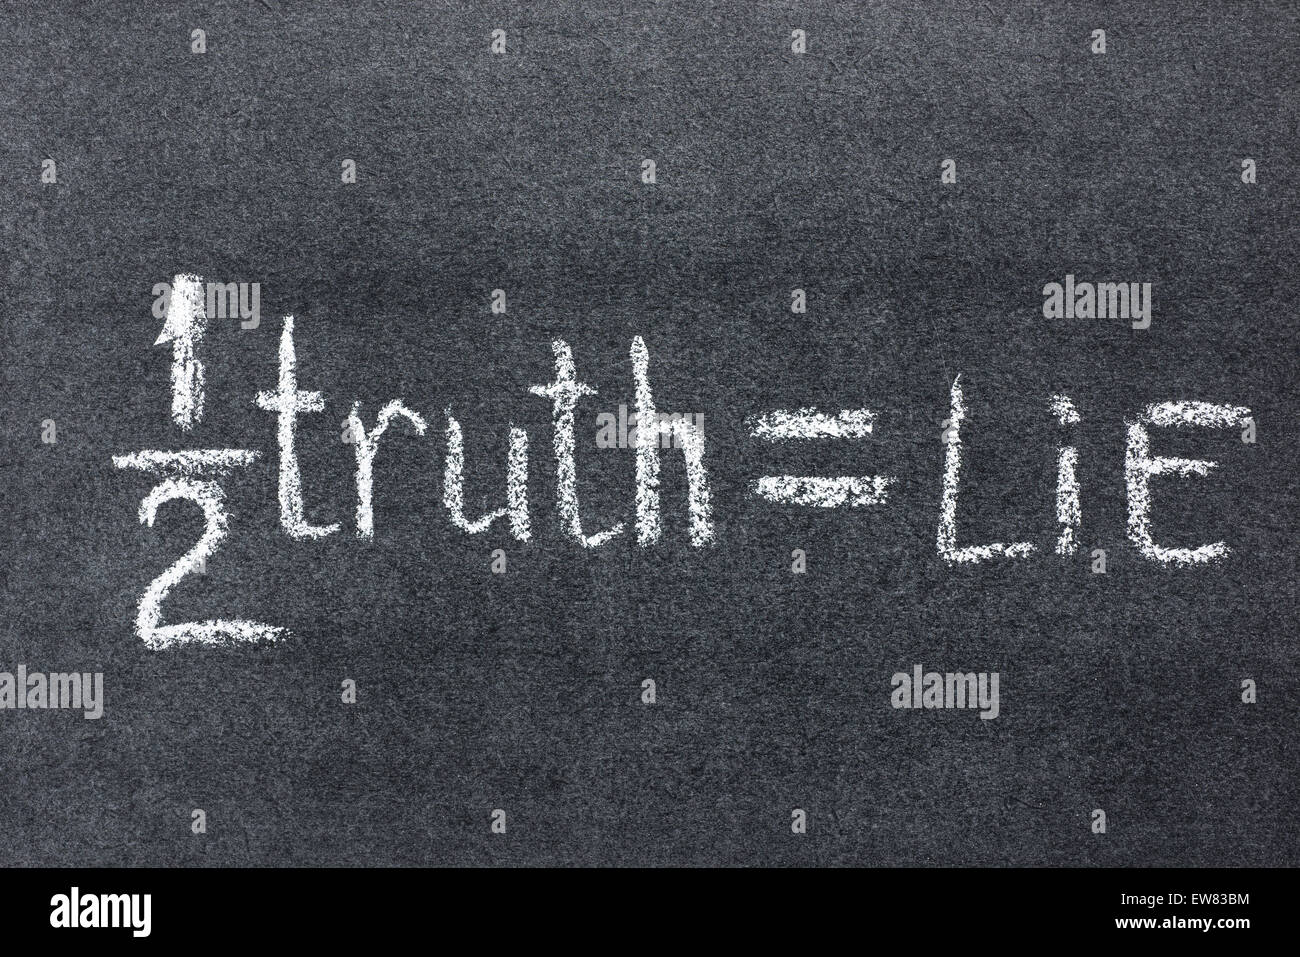 simple chalkboard interpretation of famous B.Franklin quote - half a truth is often a great lie Stock Photo